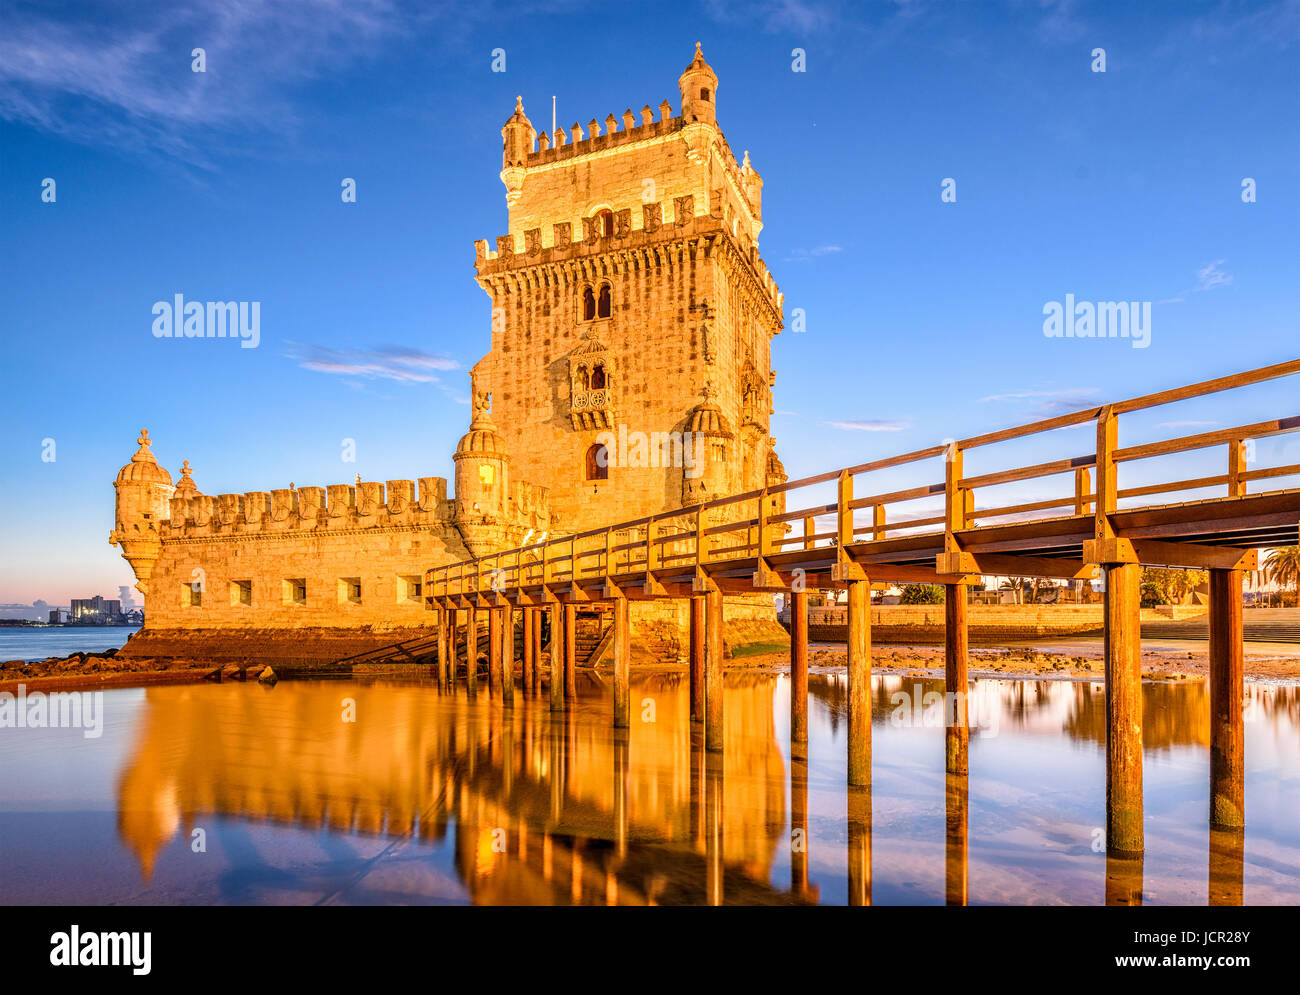 Belem Tower on the Tagus River in Lisbon, Portugal. Stock Photo